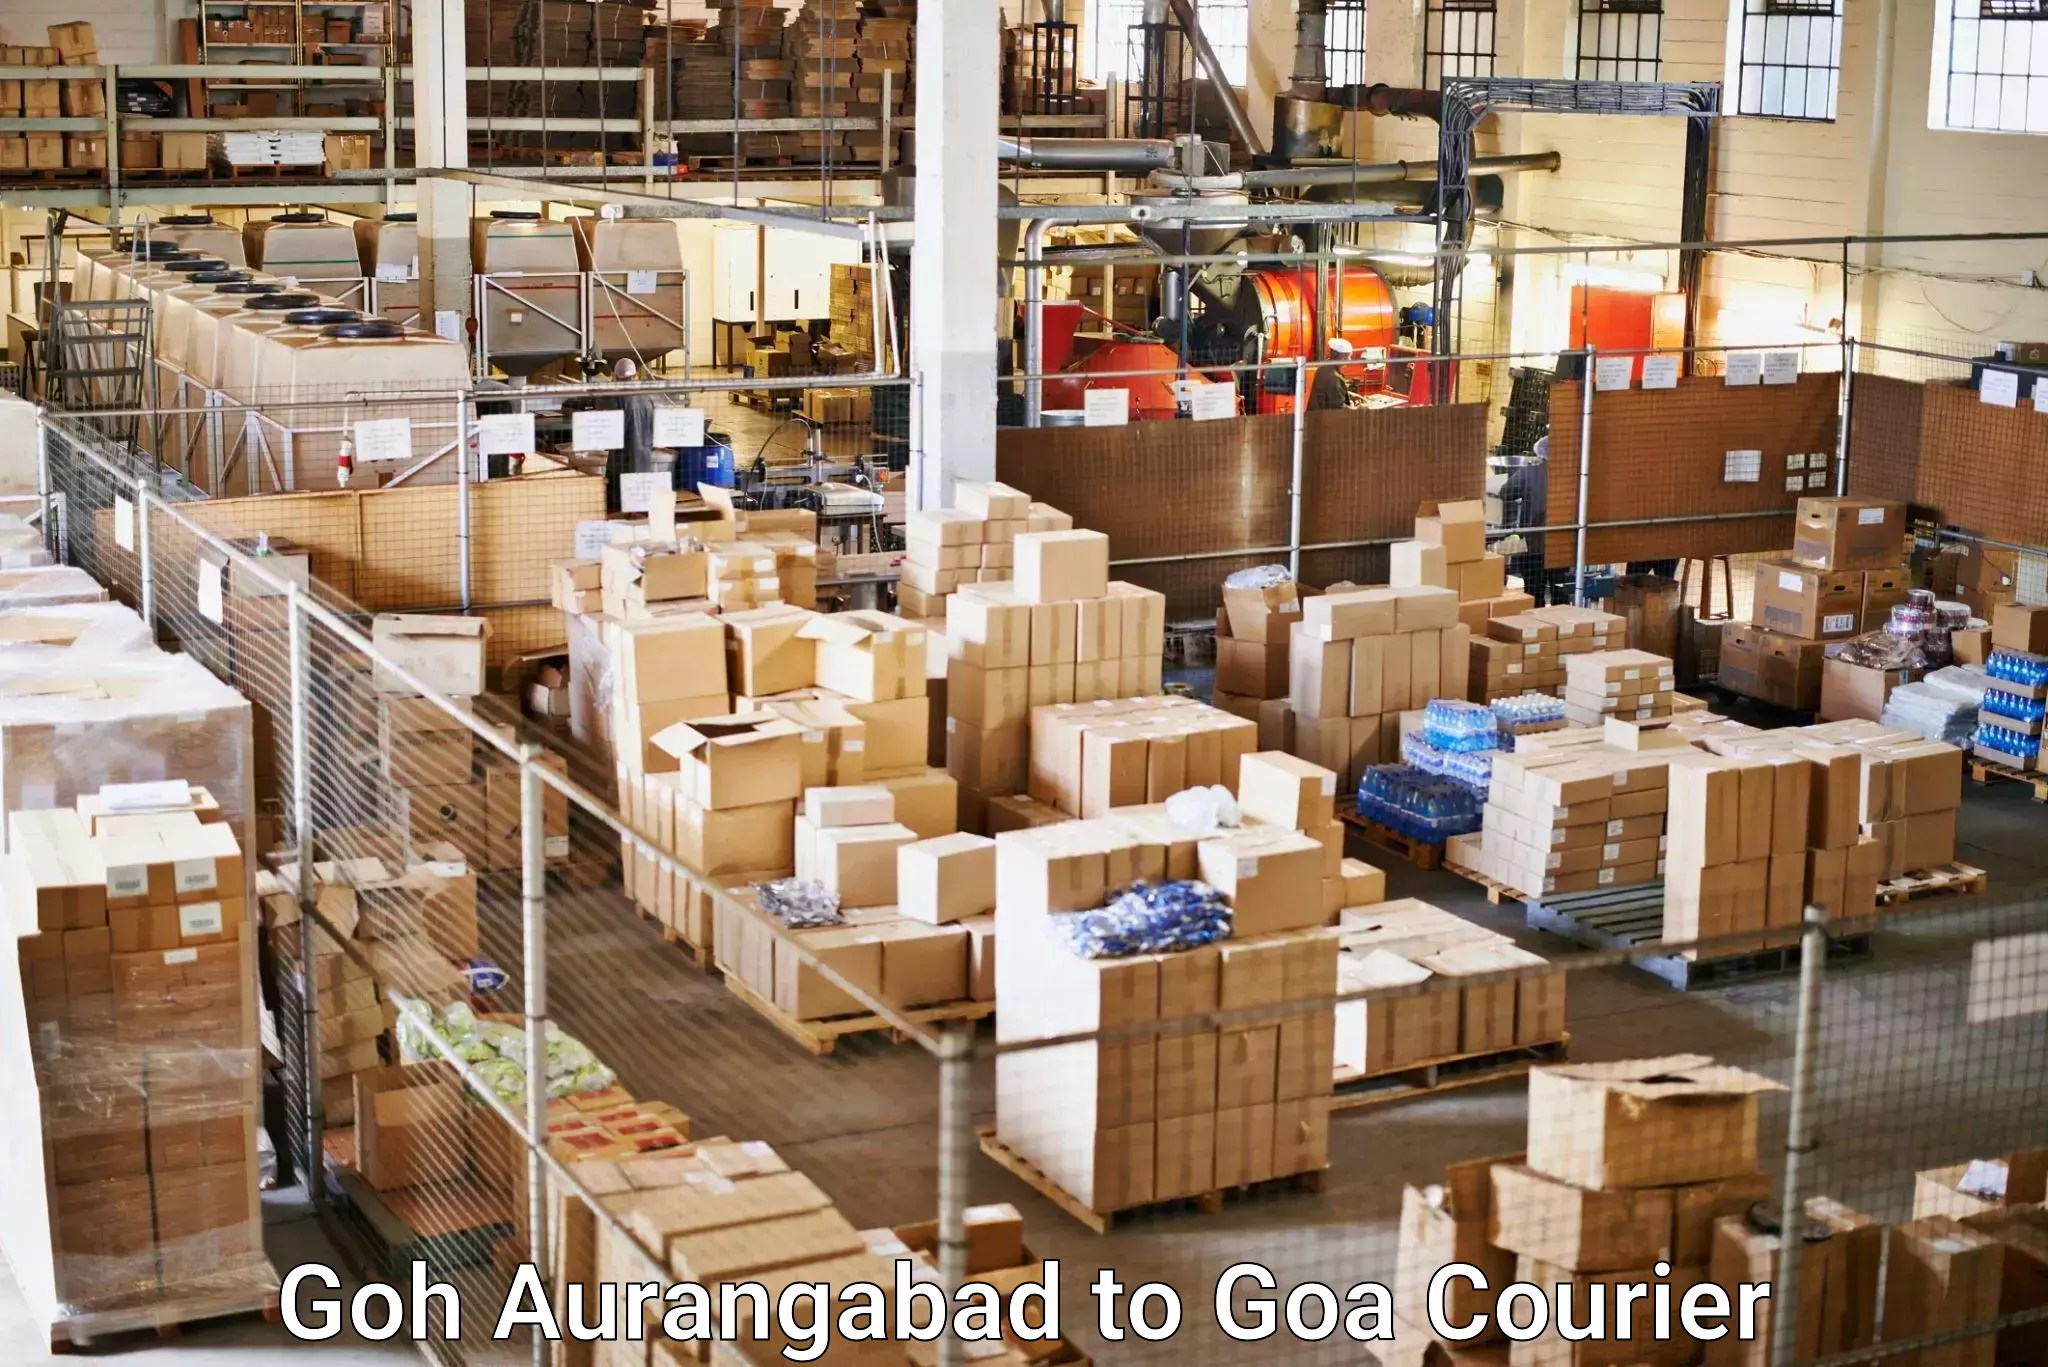 Personalized courier experiences in Goh Aurangabad to South Goa